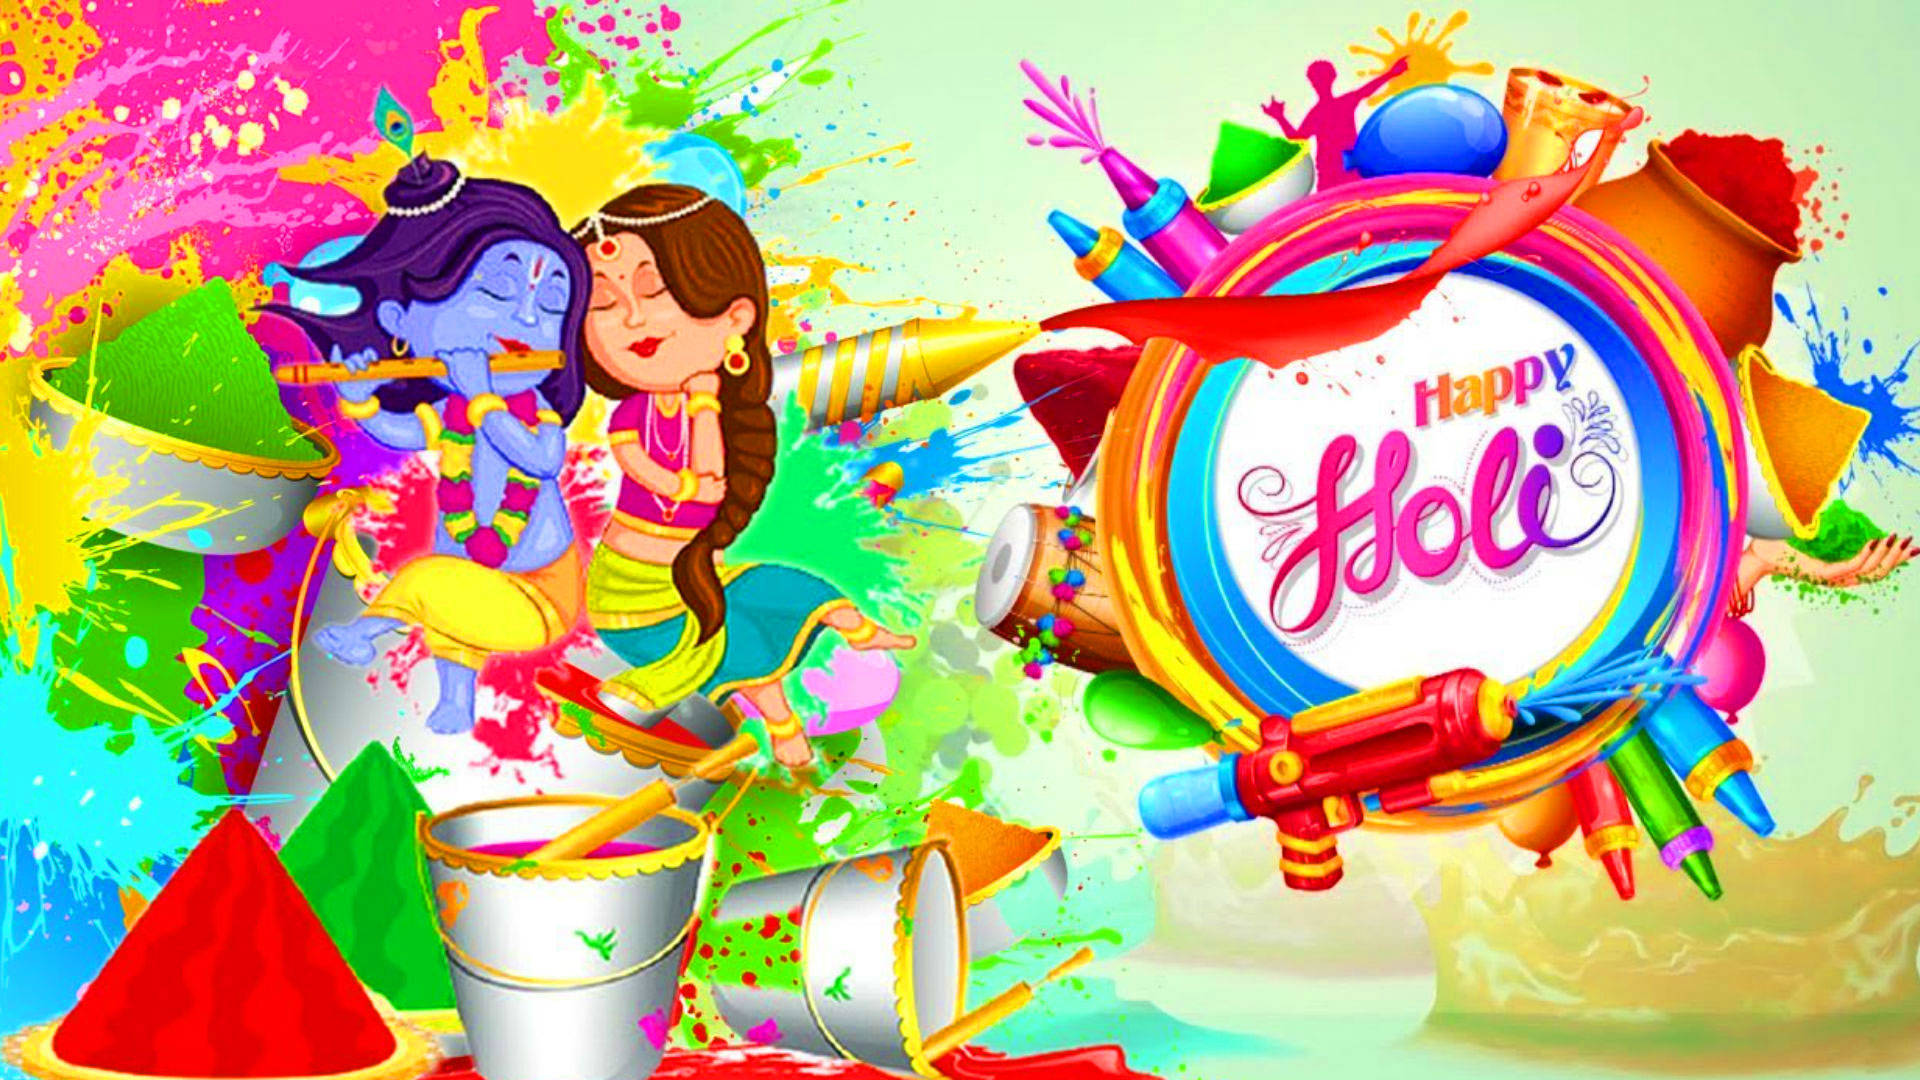 Celebrate The Festival Of Colors With Vibrancy - Happy Holi Hd